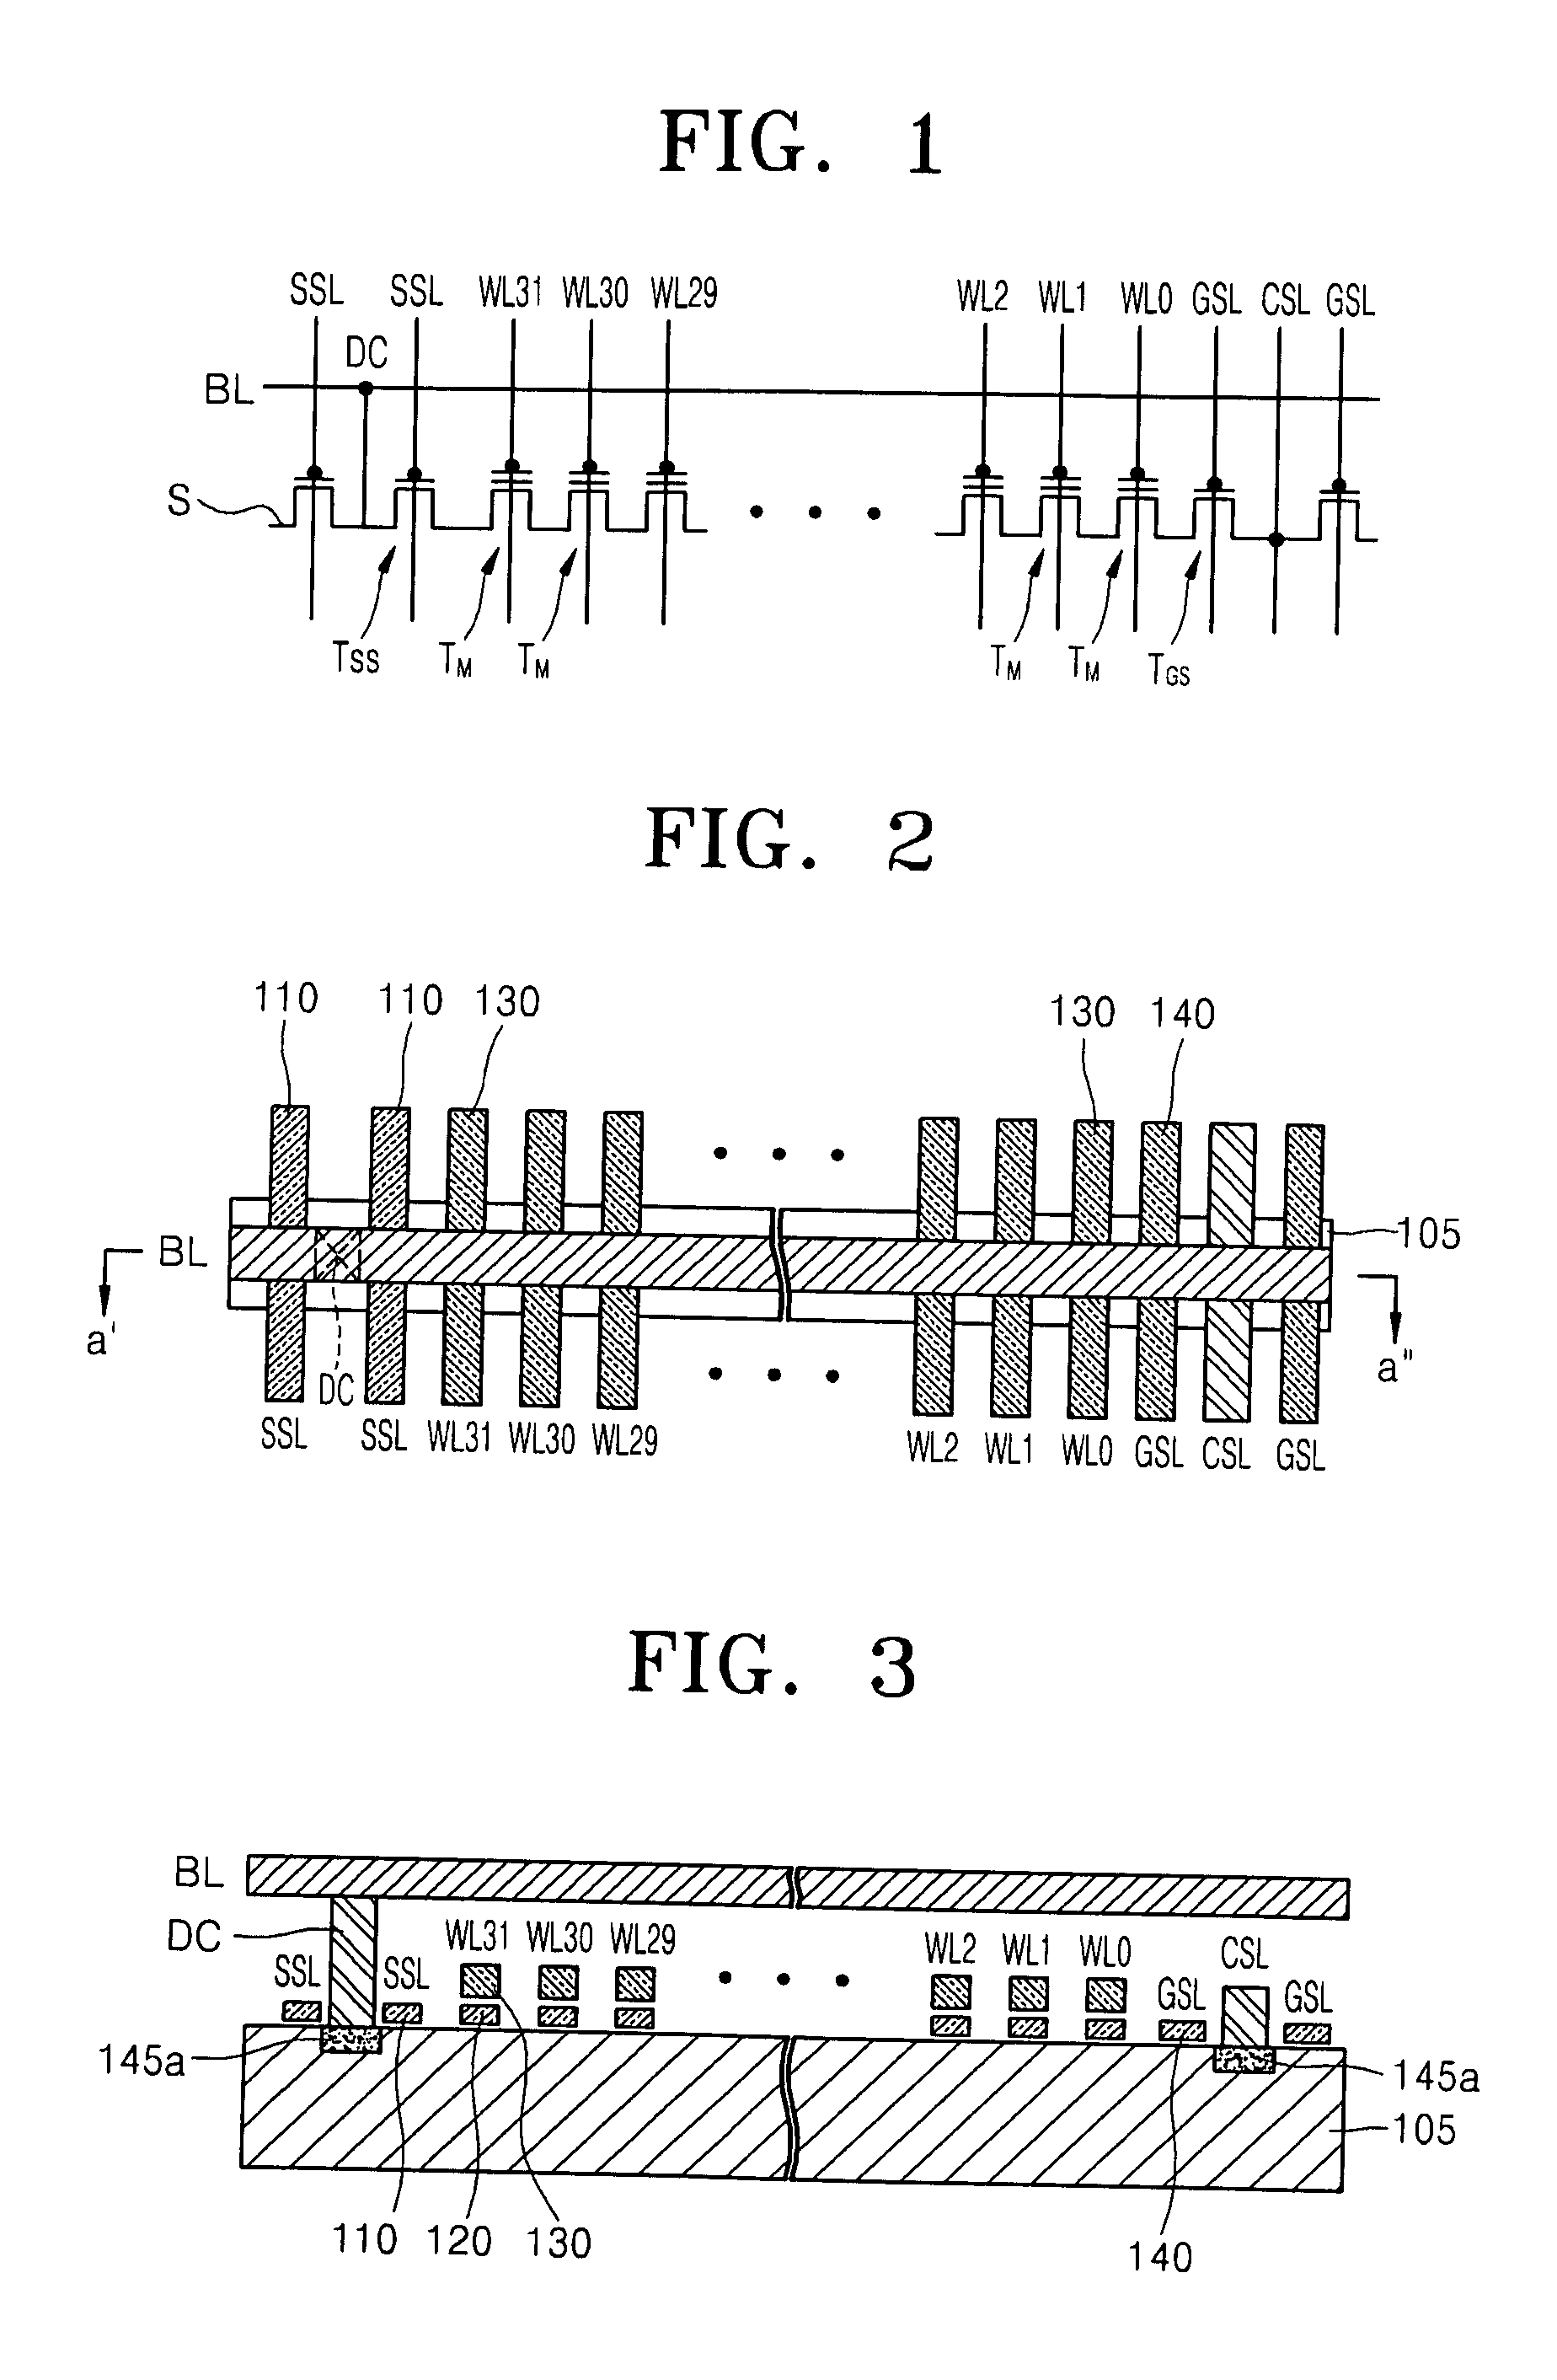 Non-volatile memory devices and methods of operating non-volatile memory devices